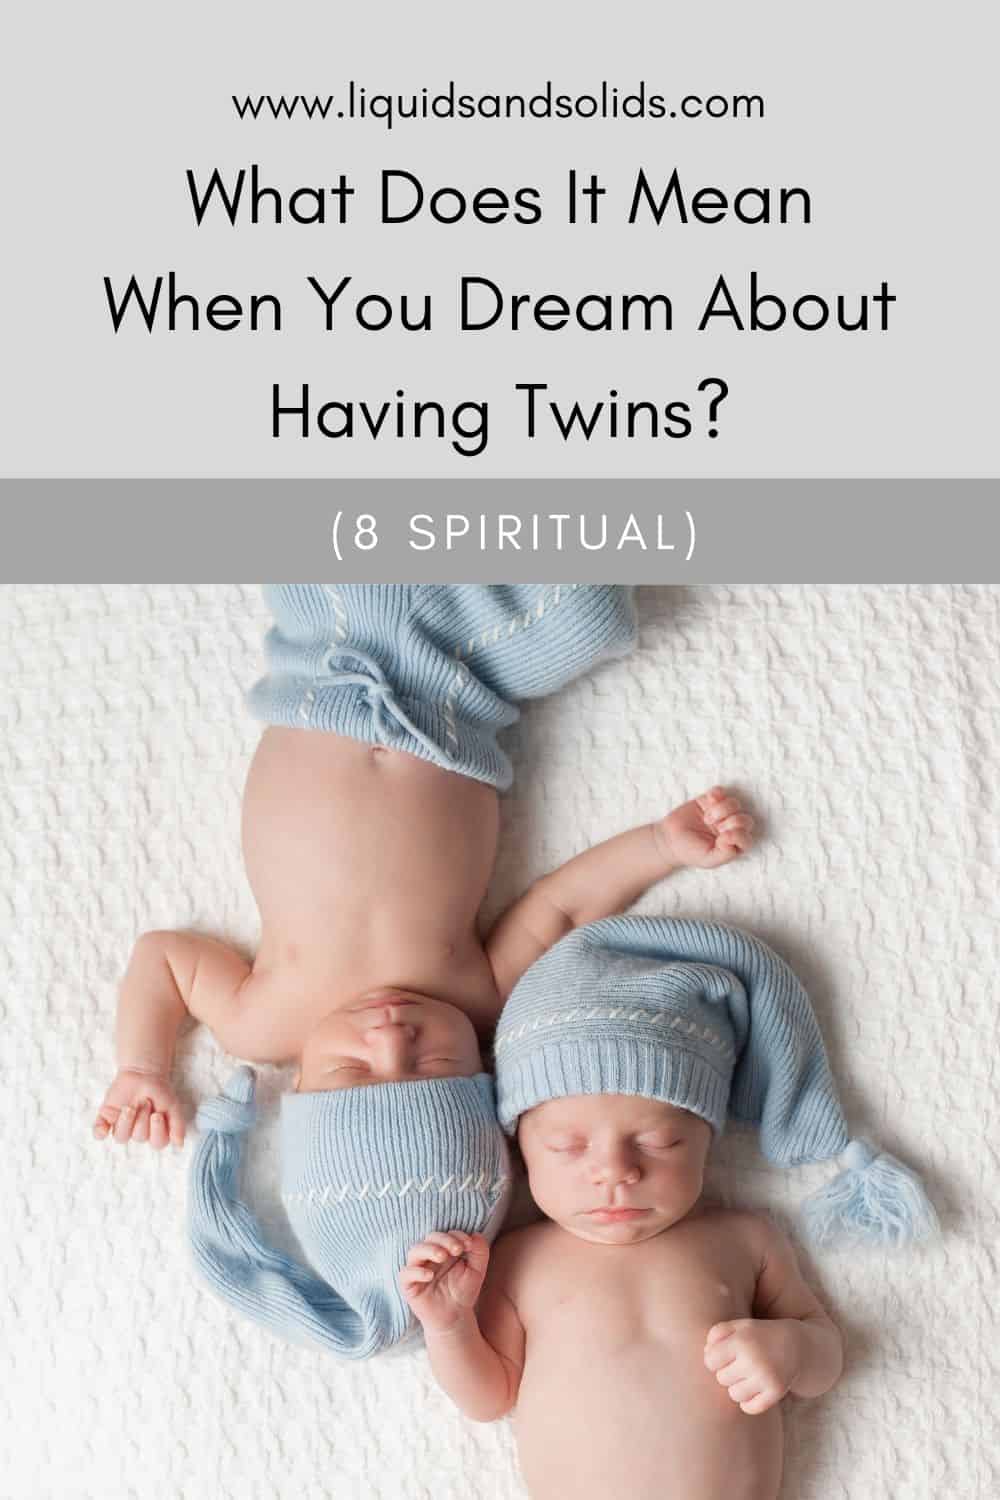 dream about having twins meaning